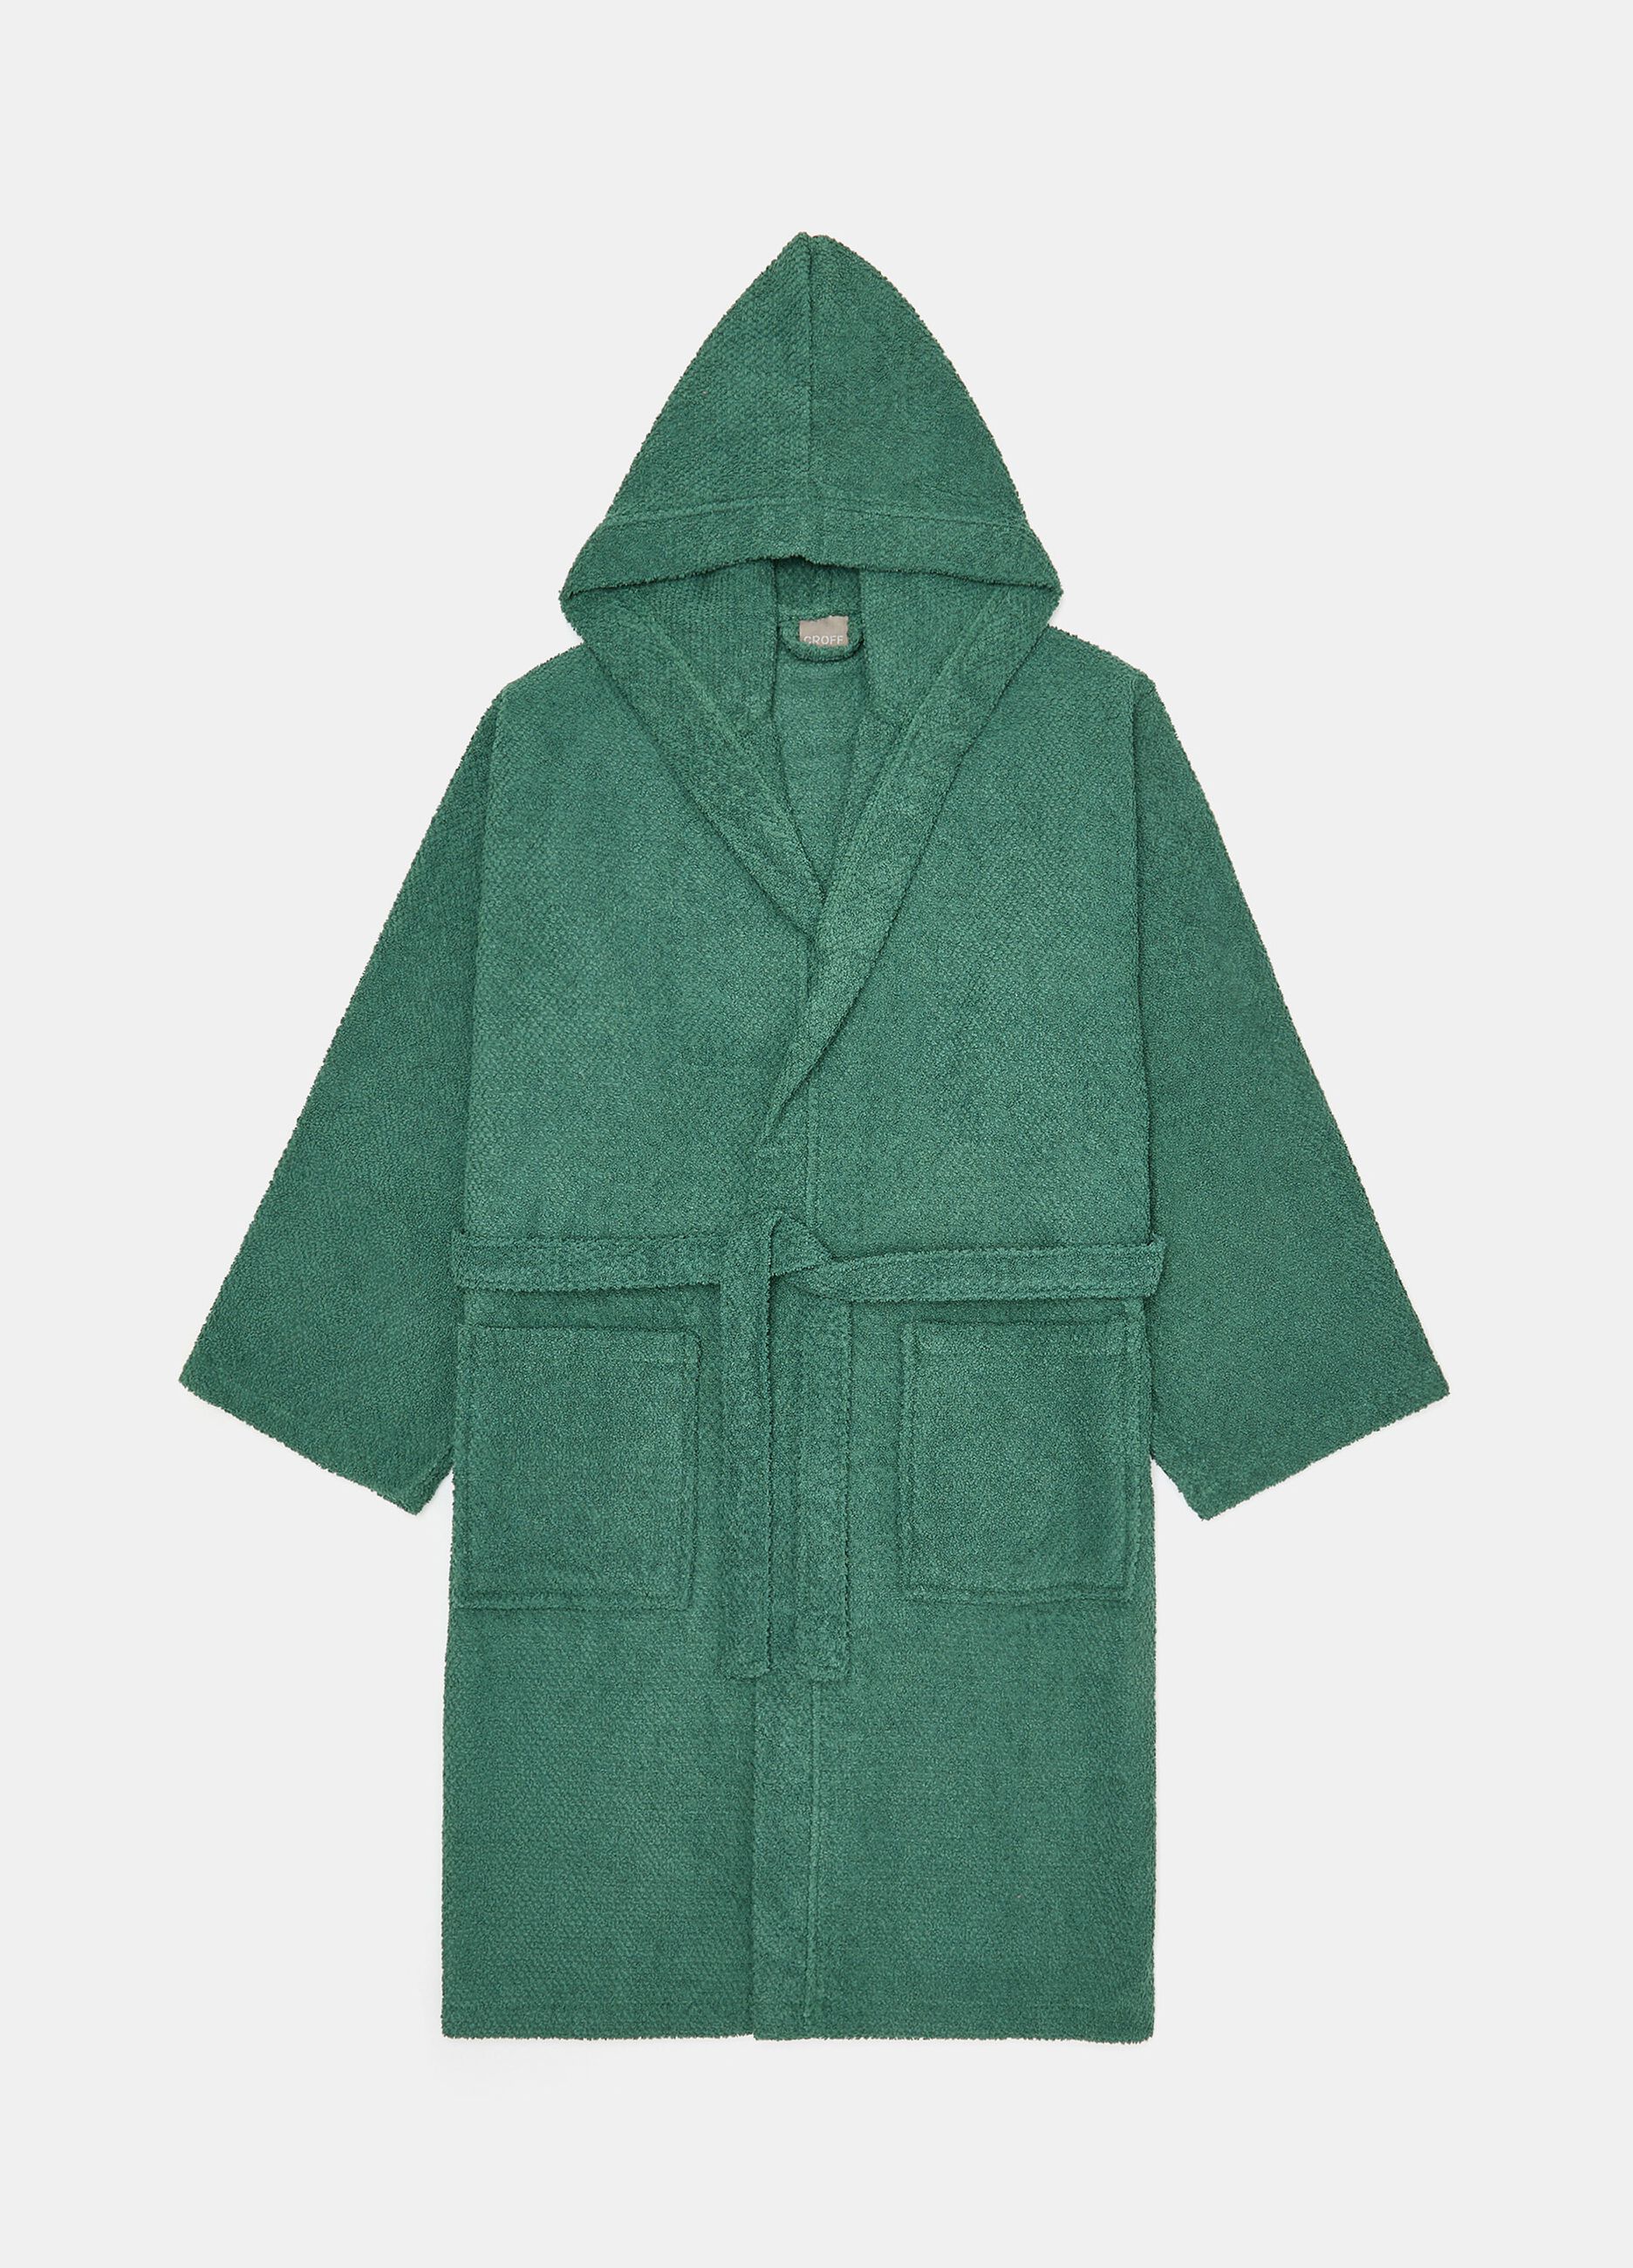 Robe in 100% cotton with hood